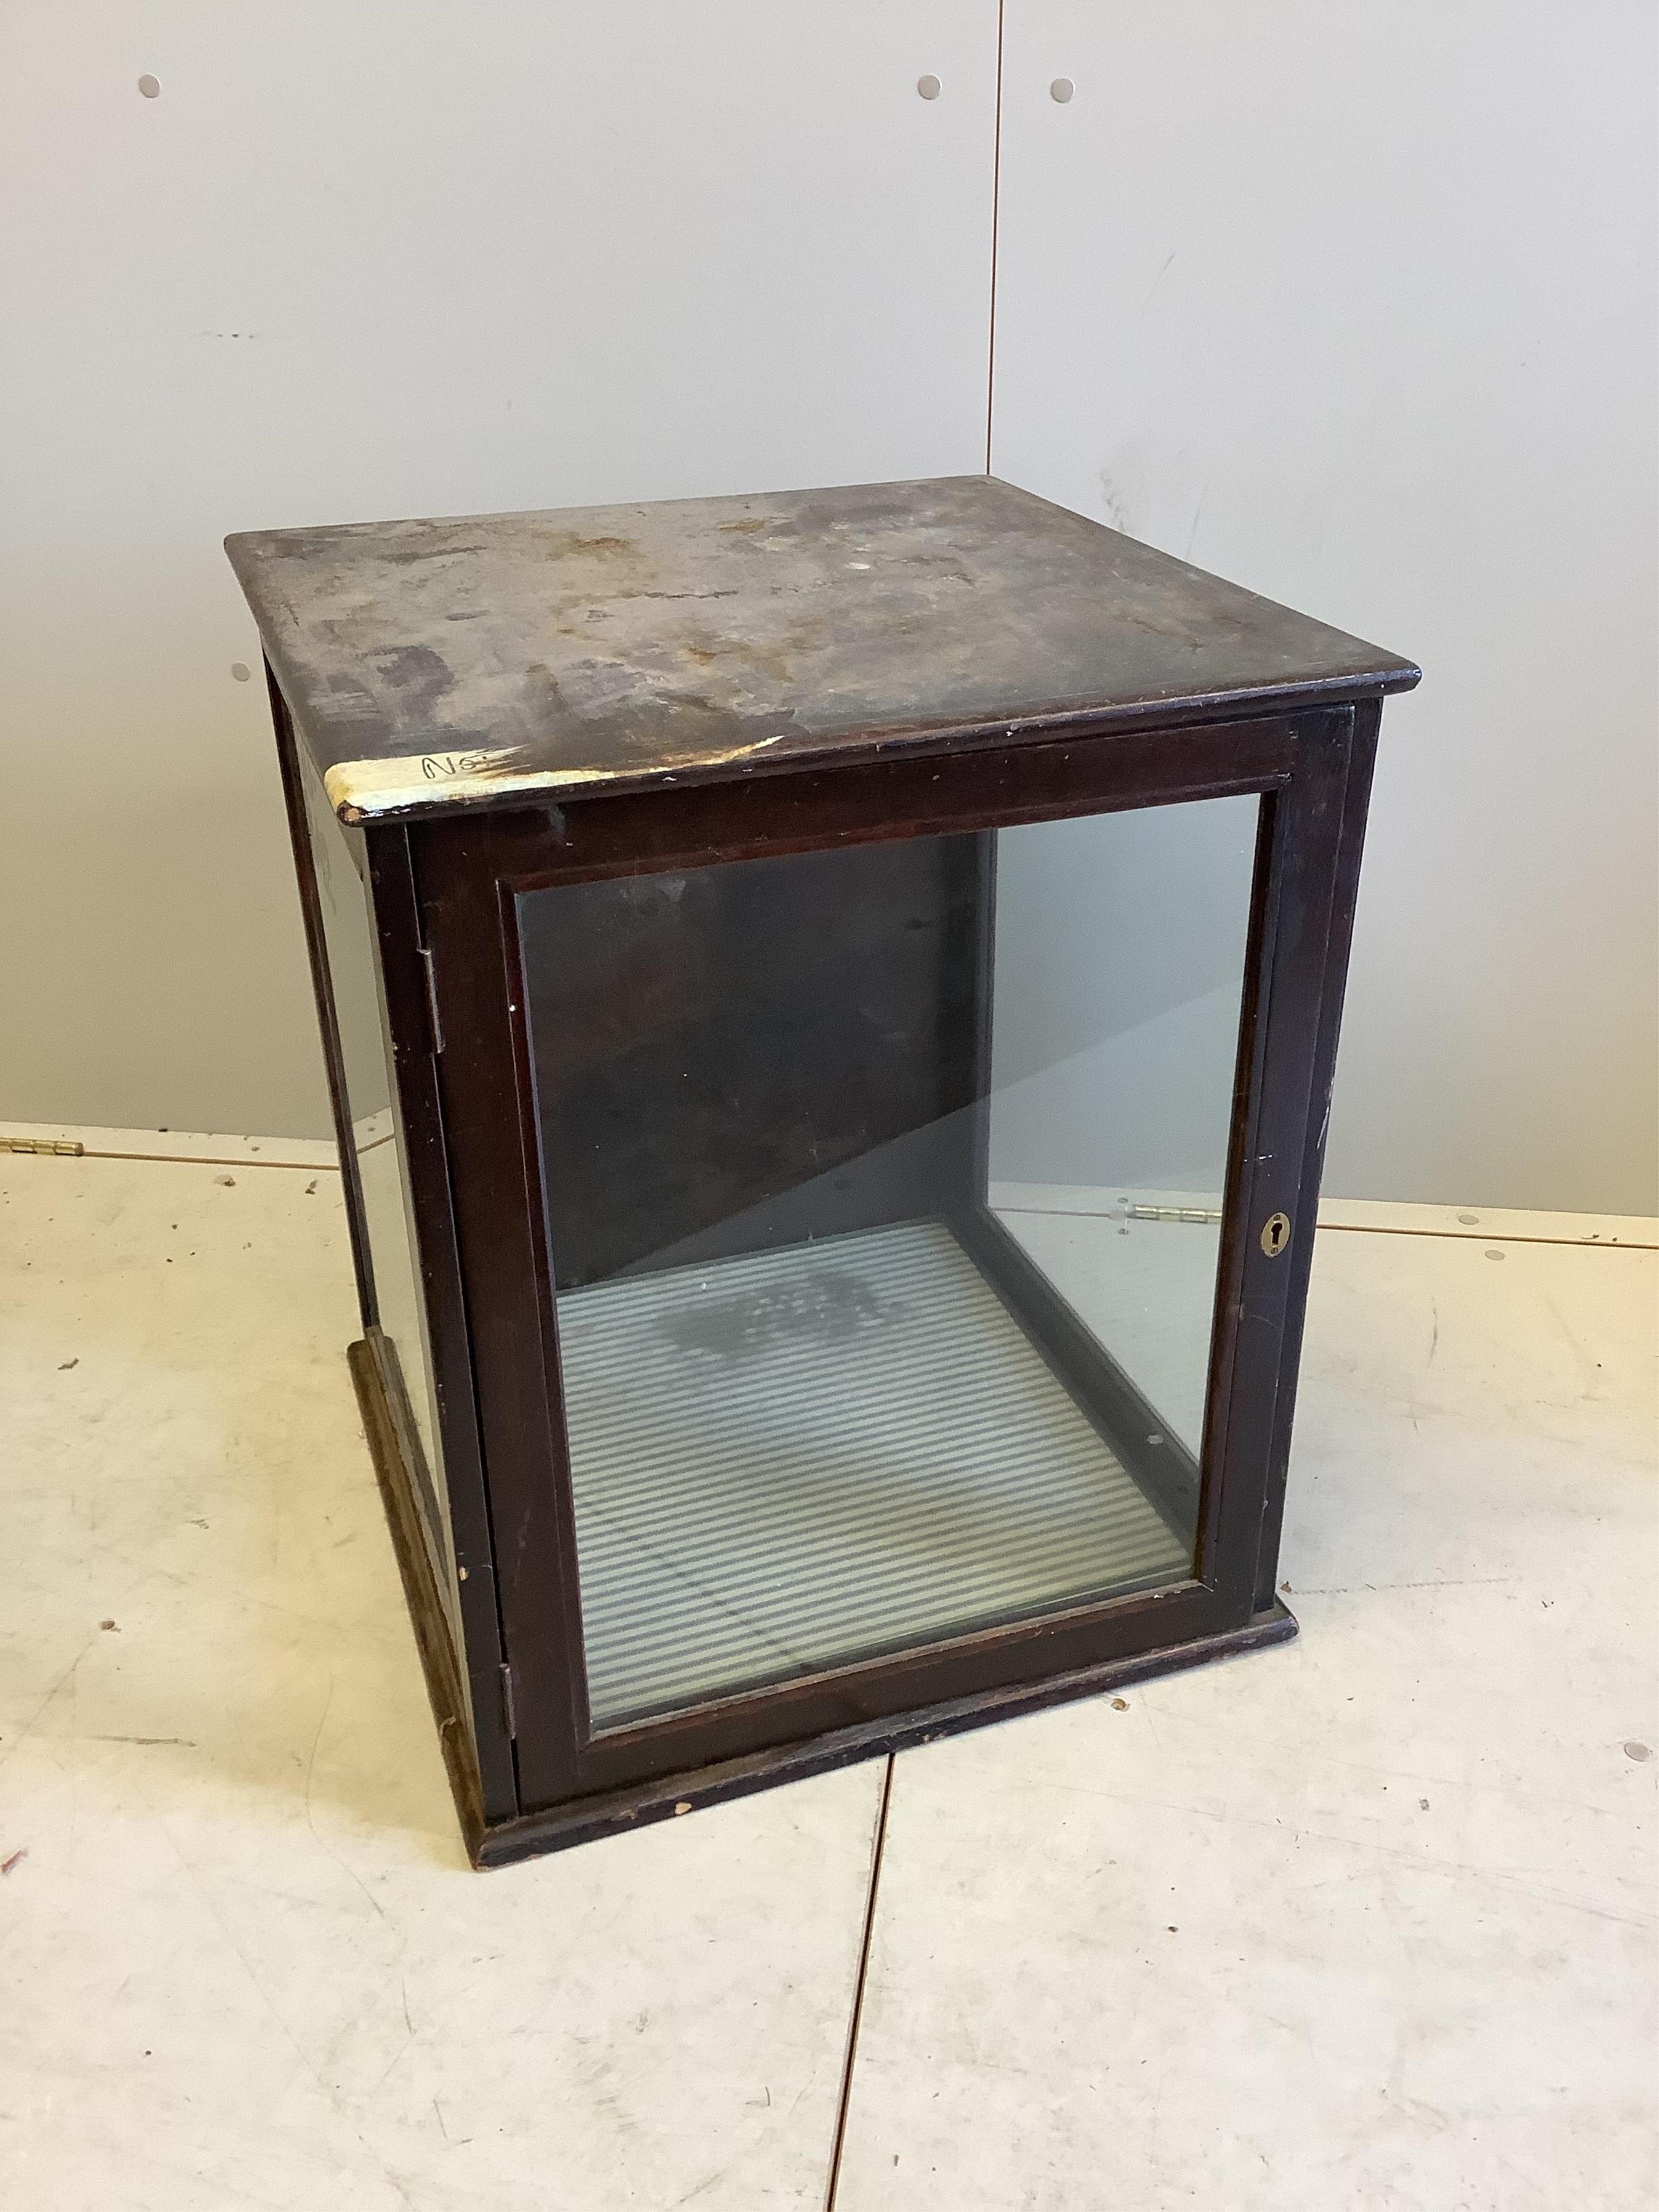 A late Victorian table top shop display cabinet, no key, width 54cm, depth 54cm, height 64cm. Condition - poor